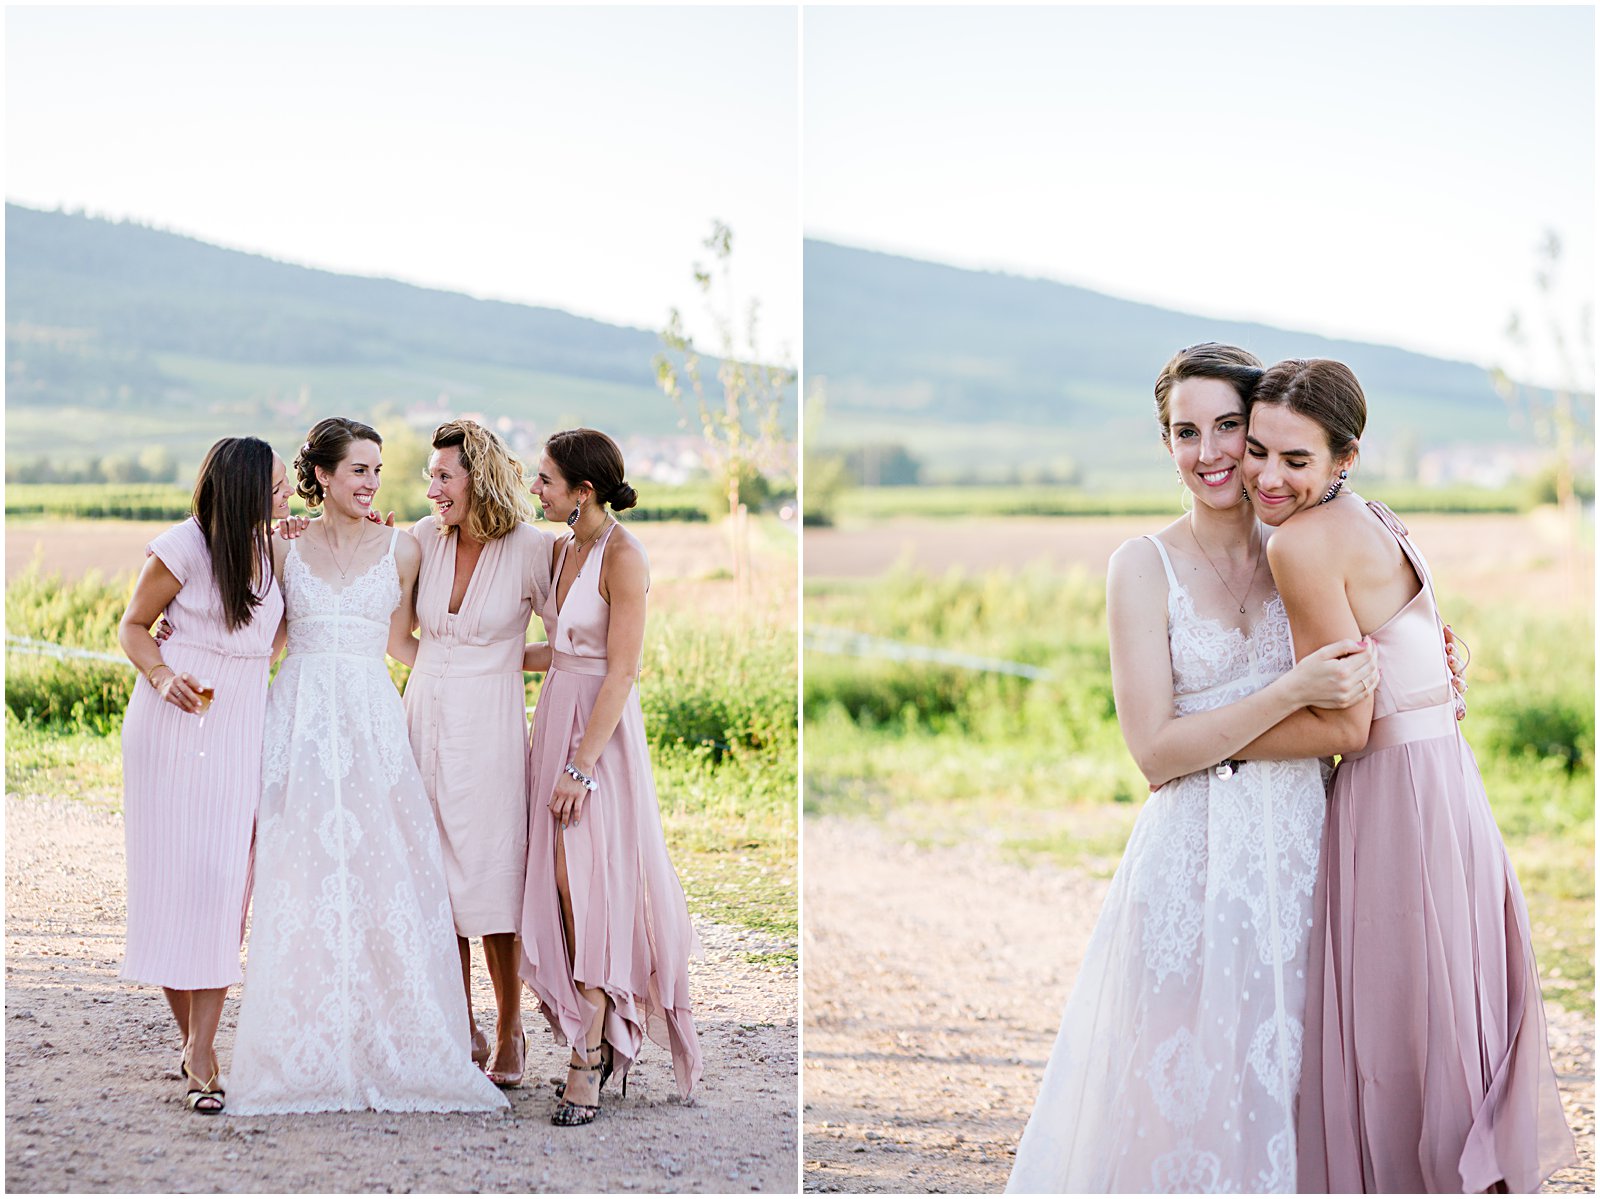 bride and bridesmaids photographed at Achilles Domaine winery in Alsace France photographed by Helena Woods